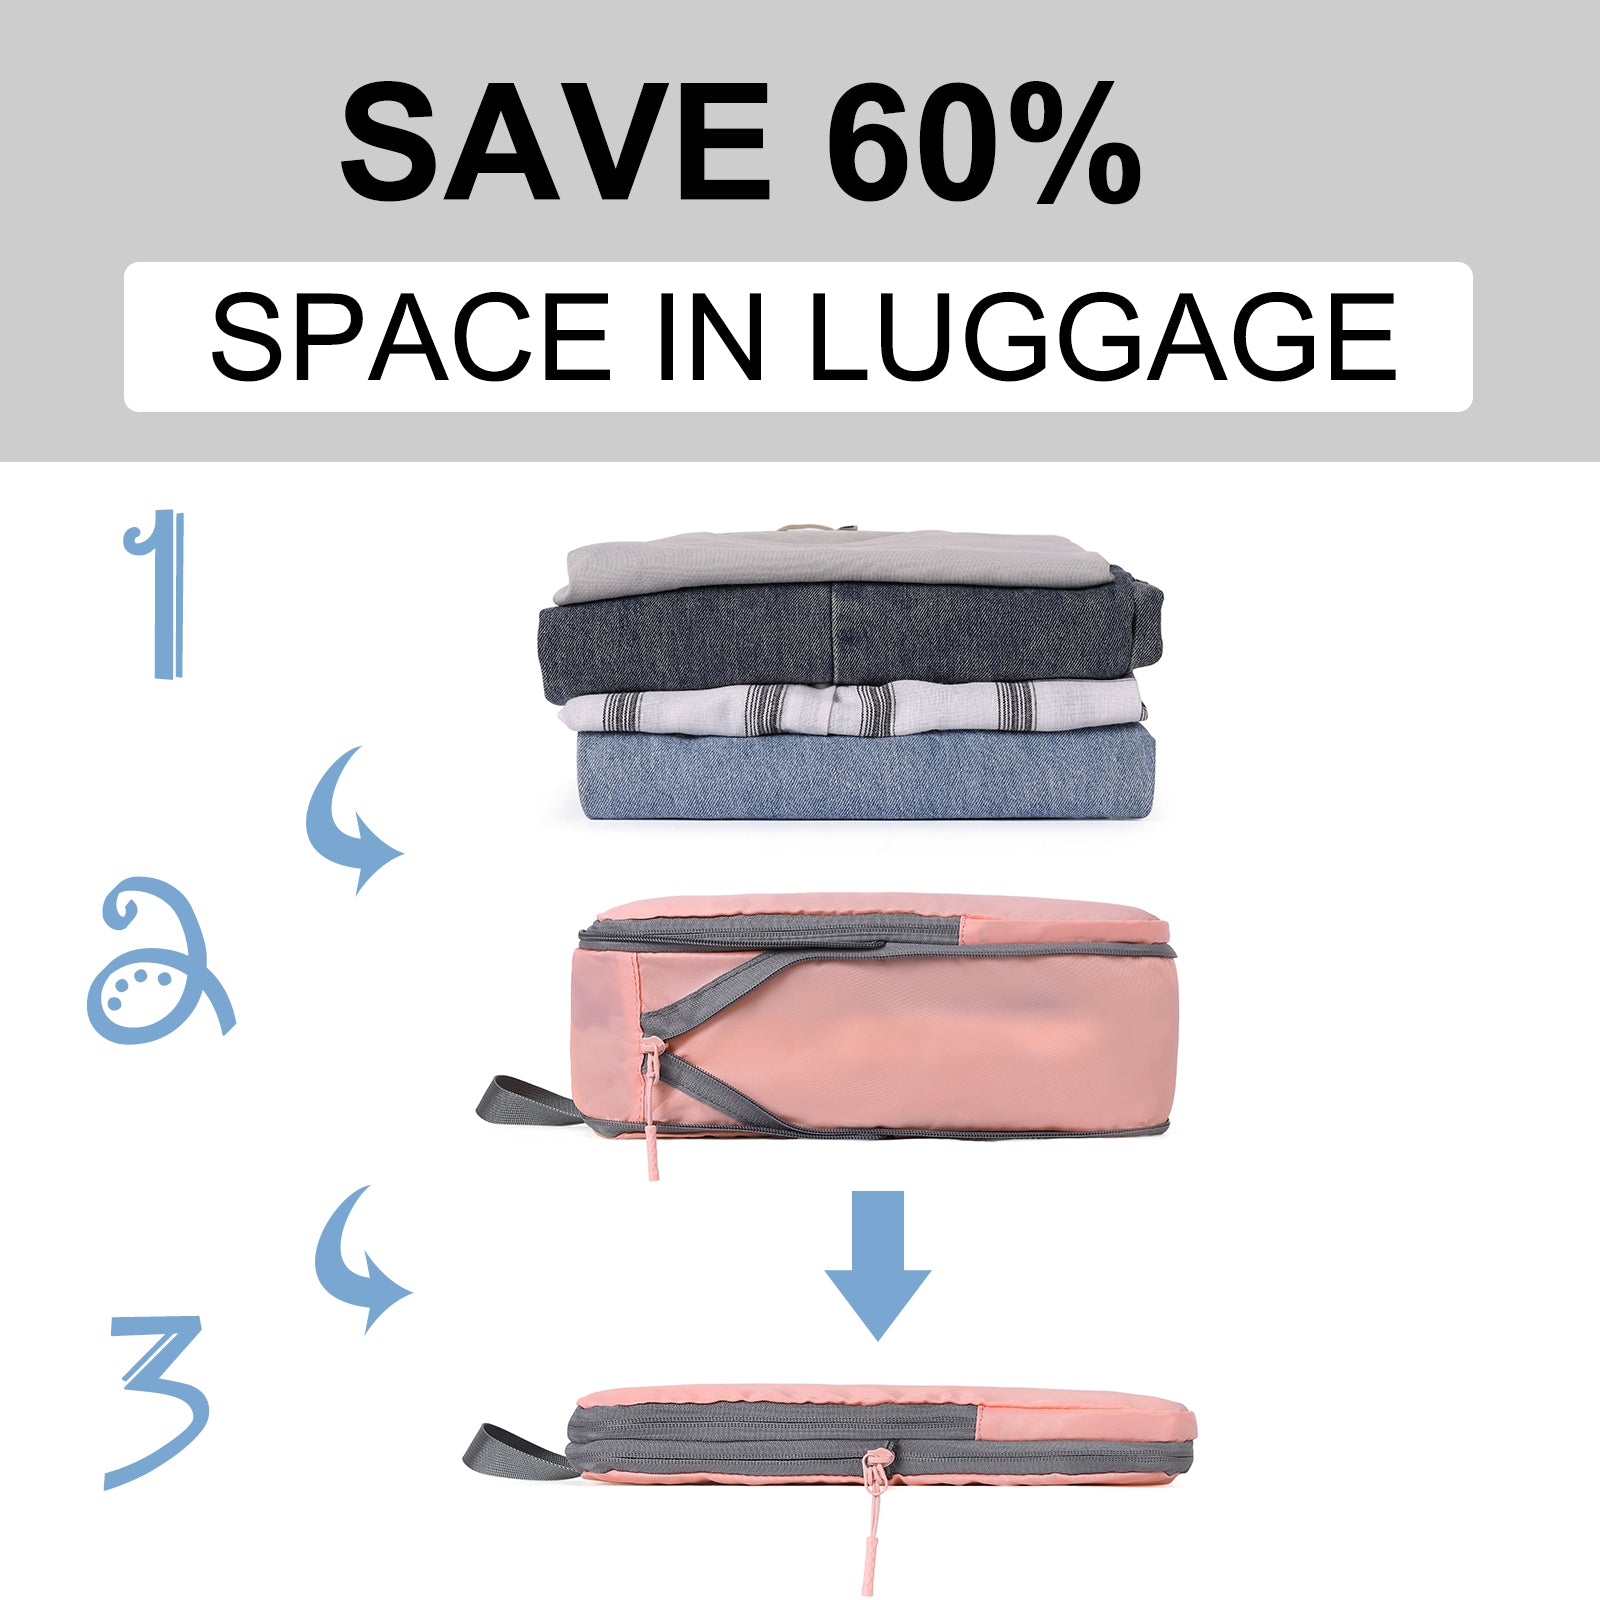 CLUCI Ultralight Packing Cubes 7 Set,Travel Essentials include 2 Compression Packing Cubes for Suitcase 2 Packing Organizers With 1 Shoe Bag,1makeup bag and 1 Medicine bag